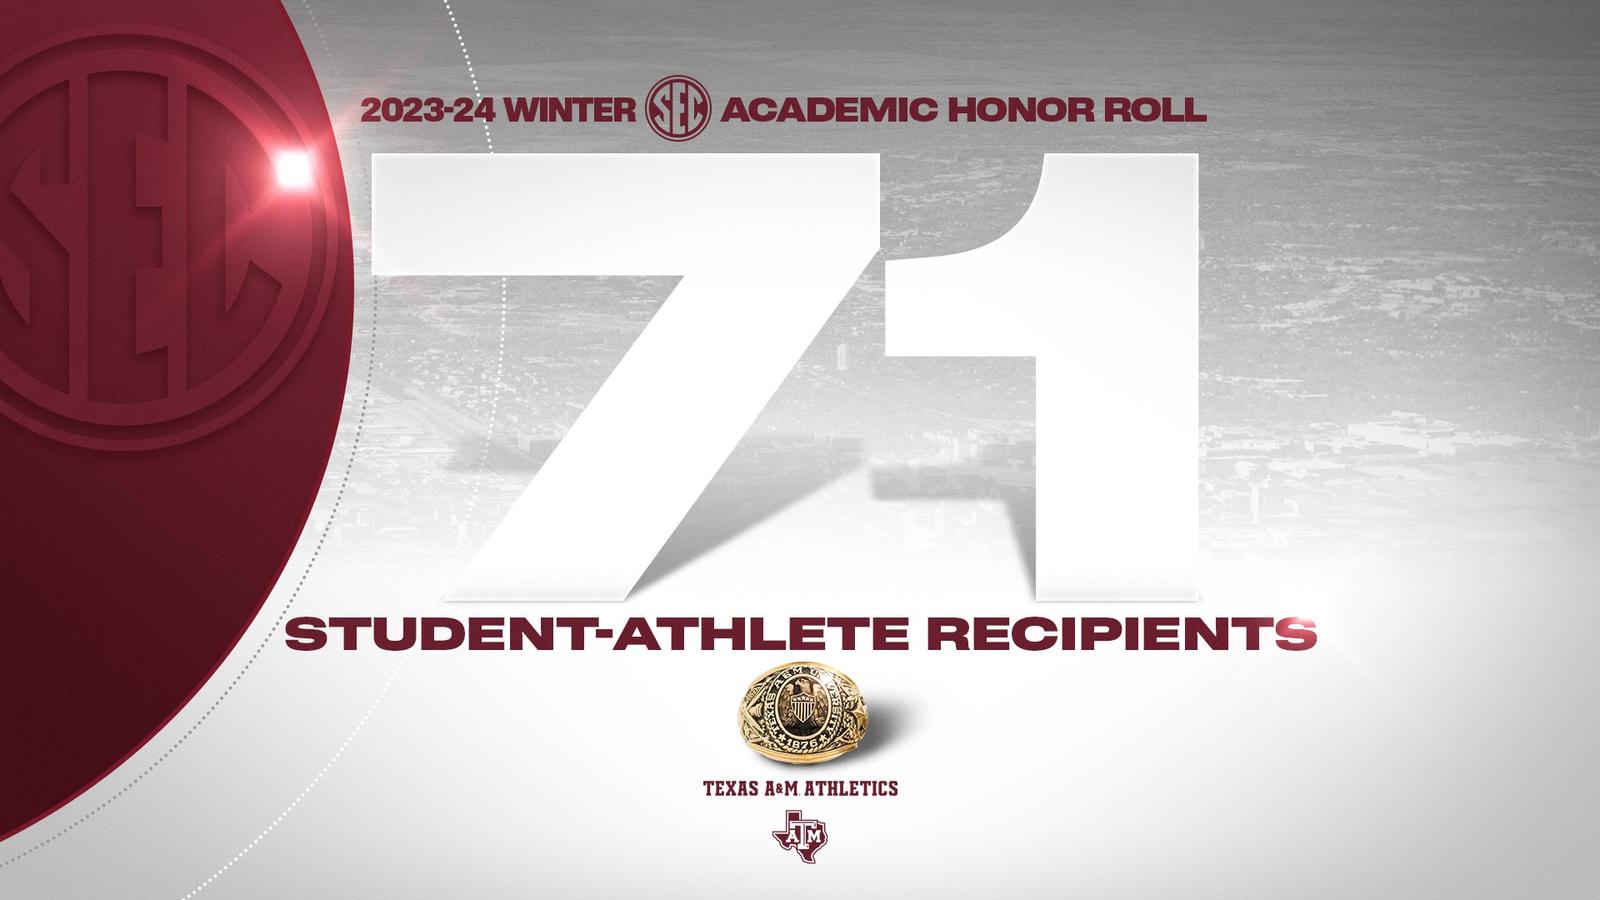 71 Aggies Selected to 2023-24 Winter SEC Academic Honor Roll